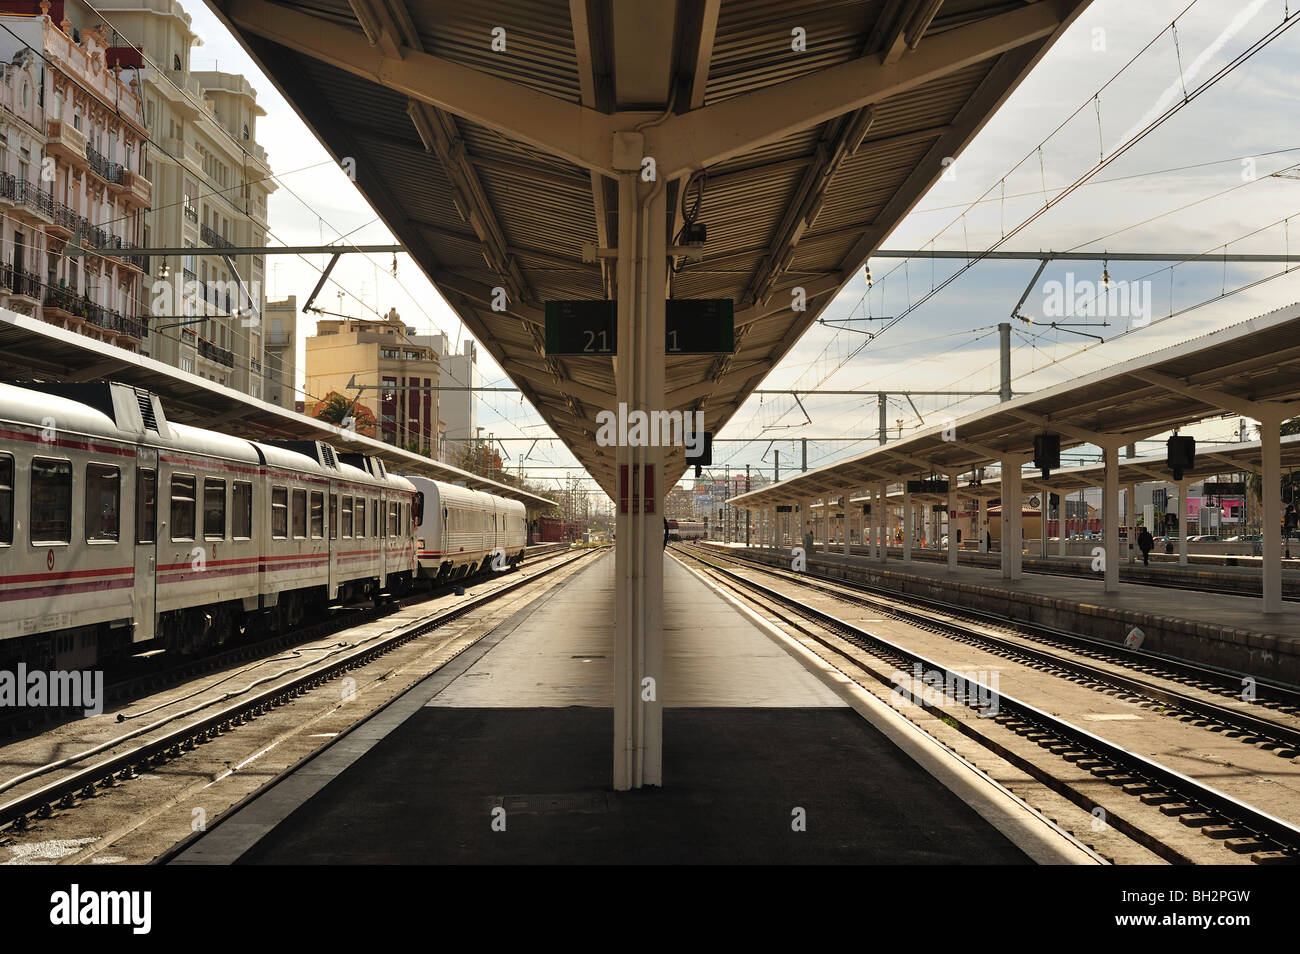 Railroad routes away and empty platform in horizontal position Stock Photo